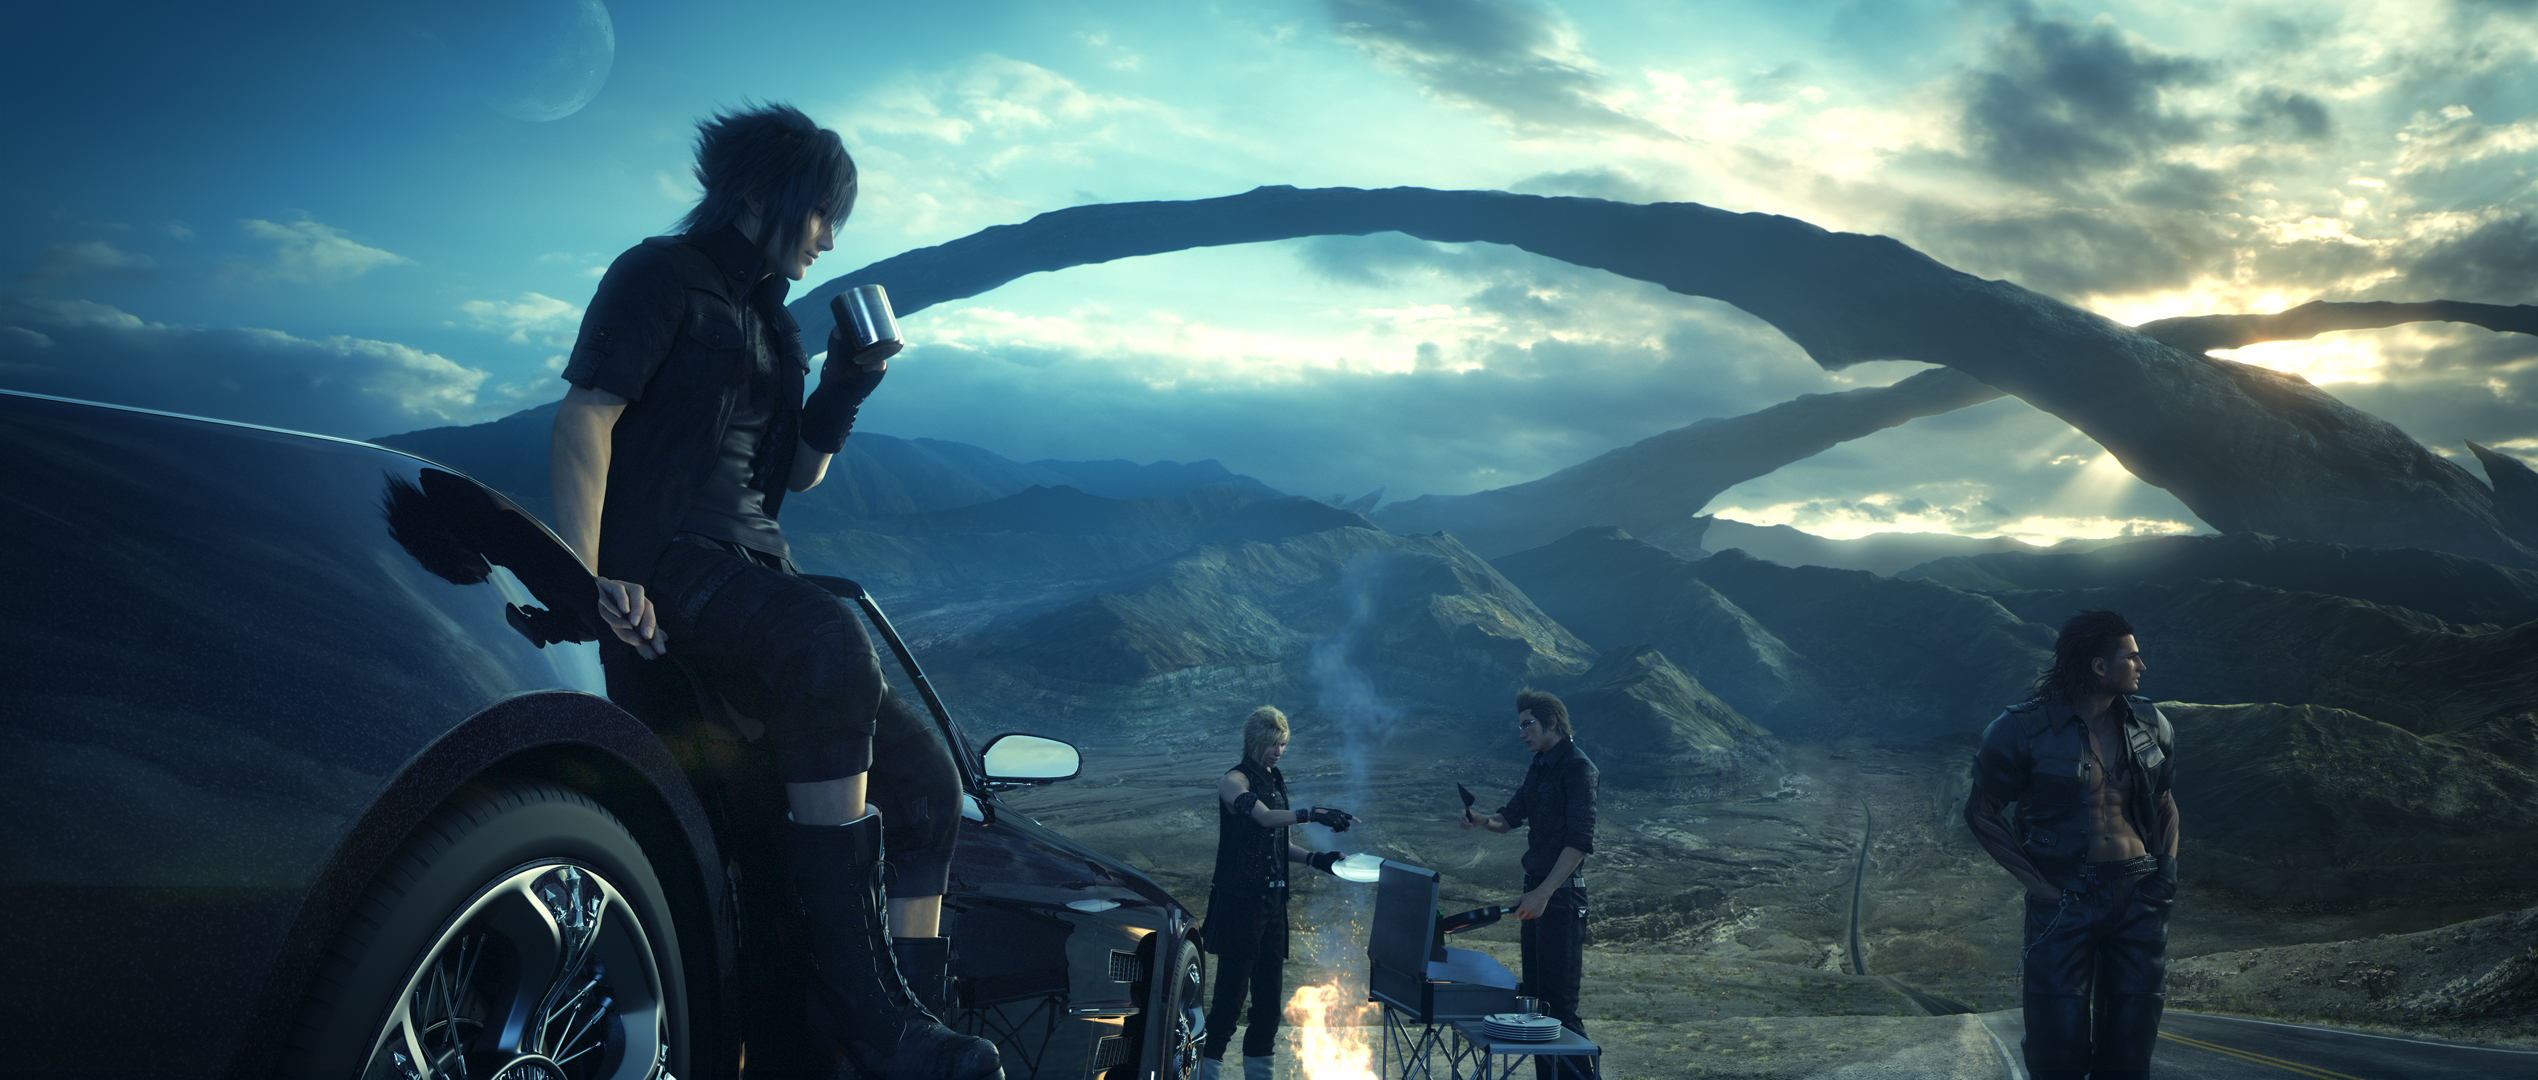 Final Fantasy Xv HD Wallpaper And Background